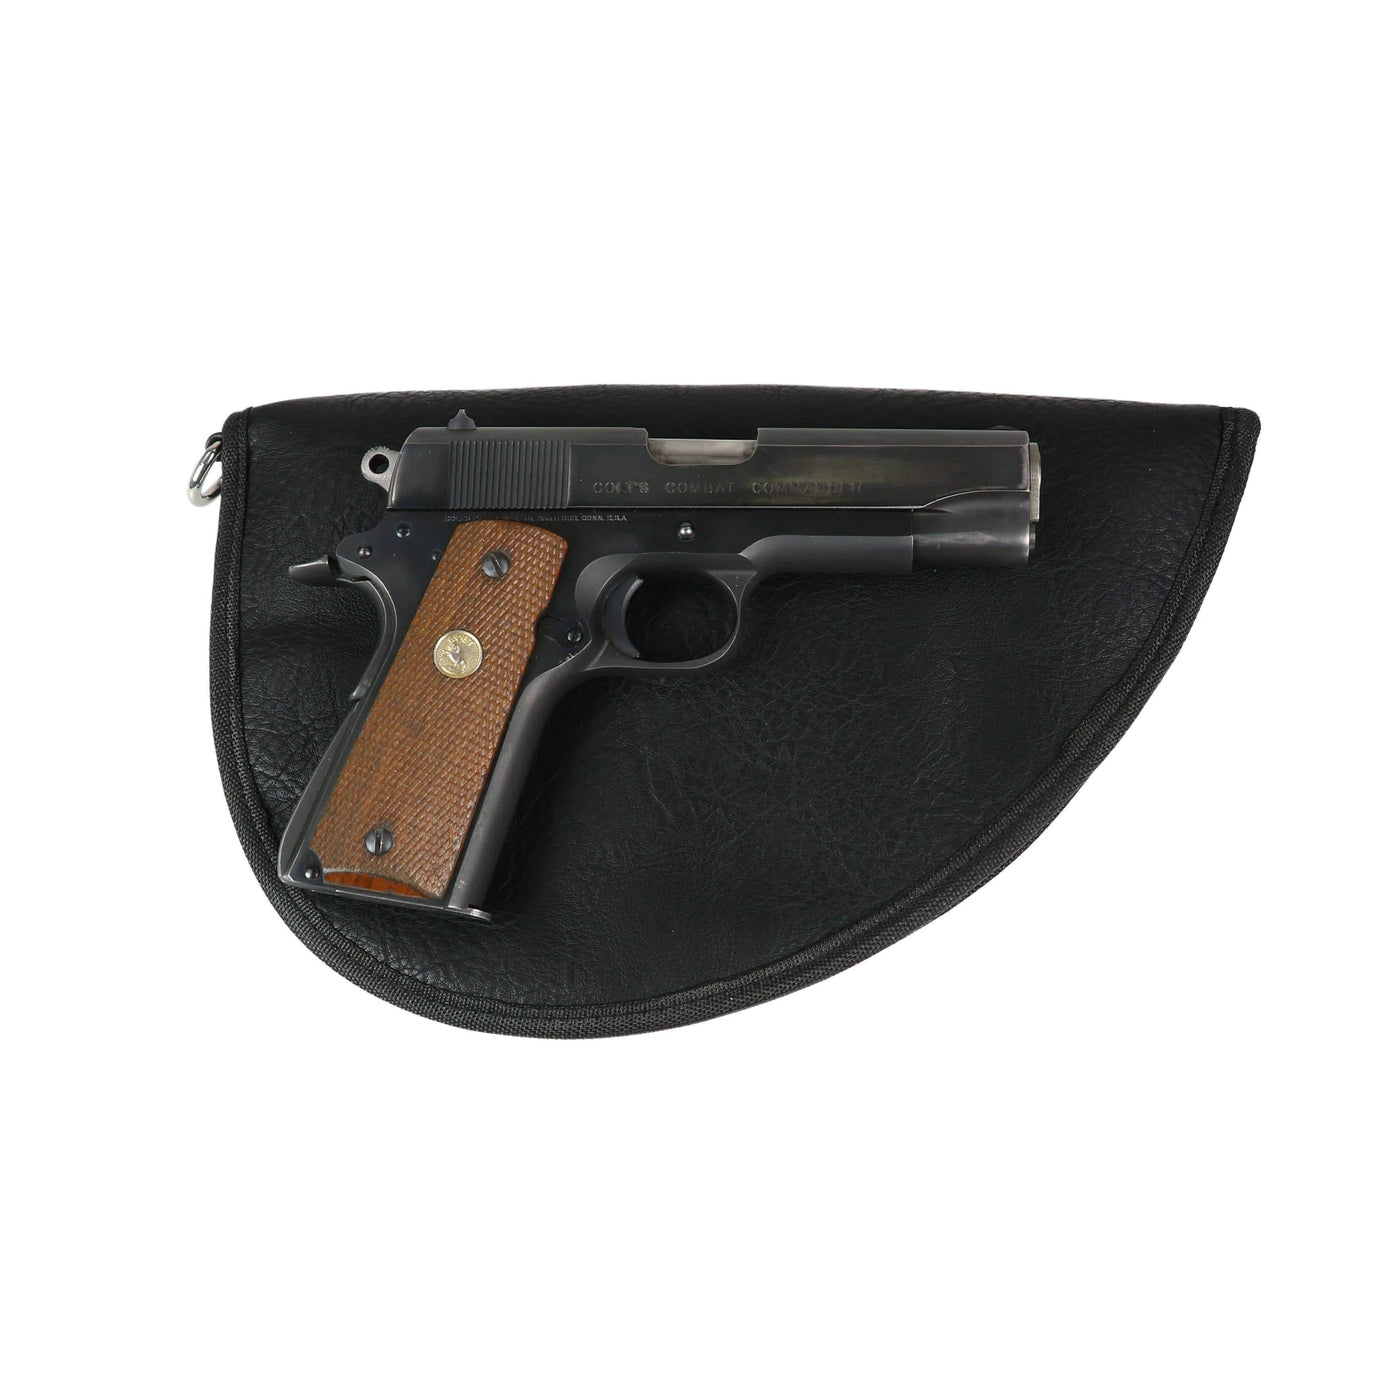 Lady Conceal Cases Large Soft Firearm Case